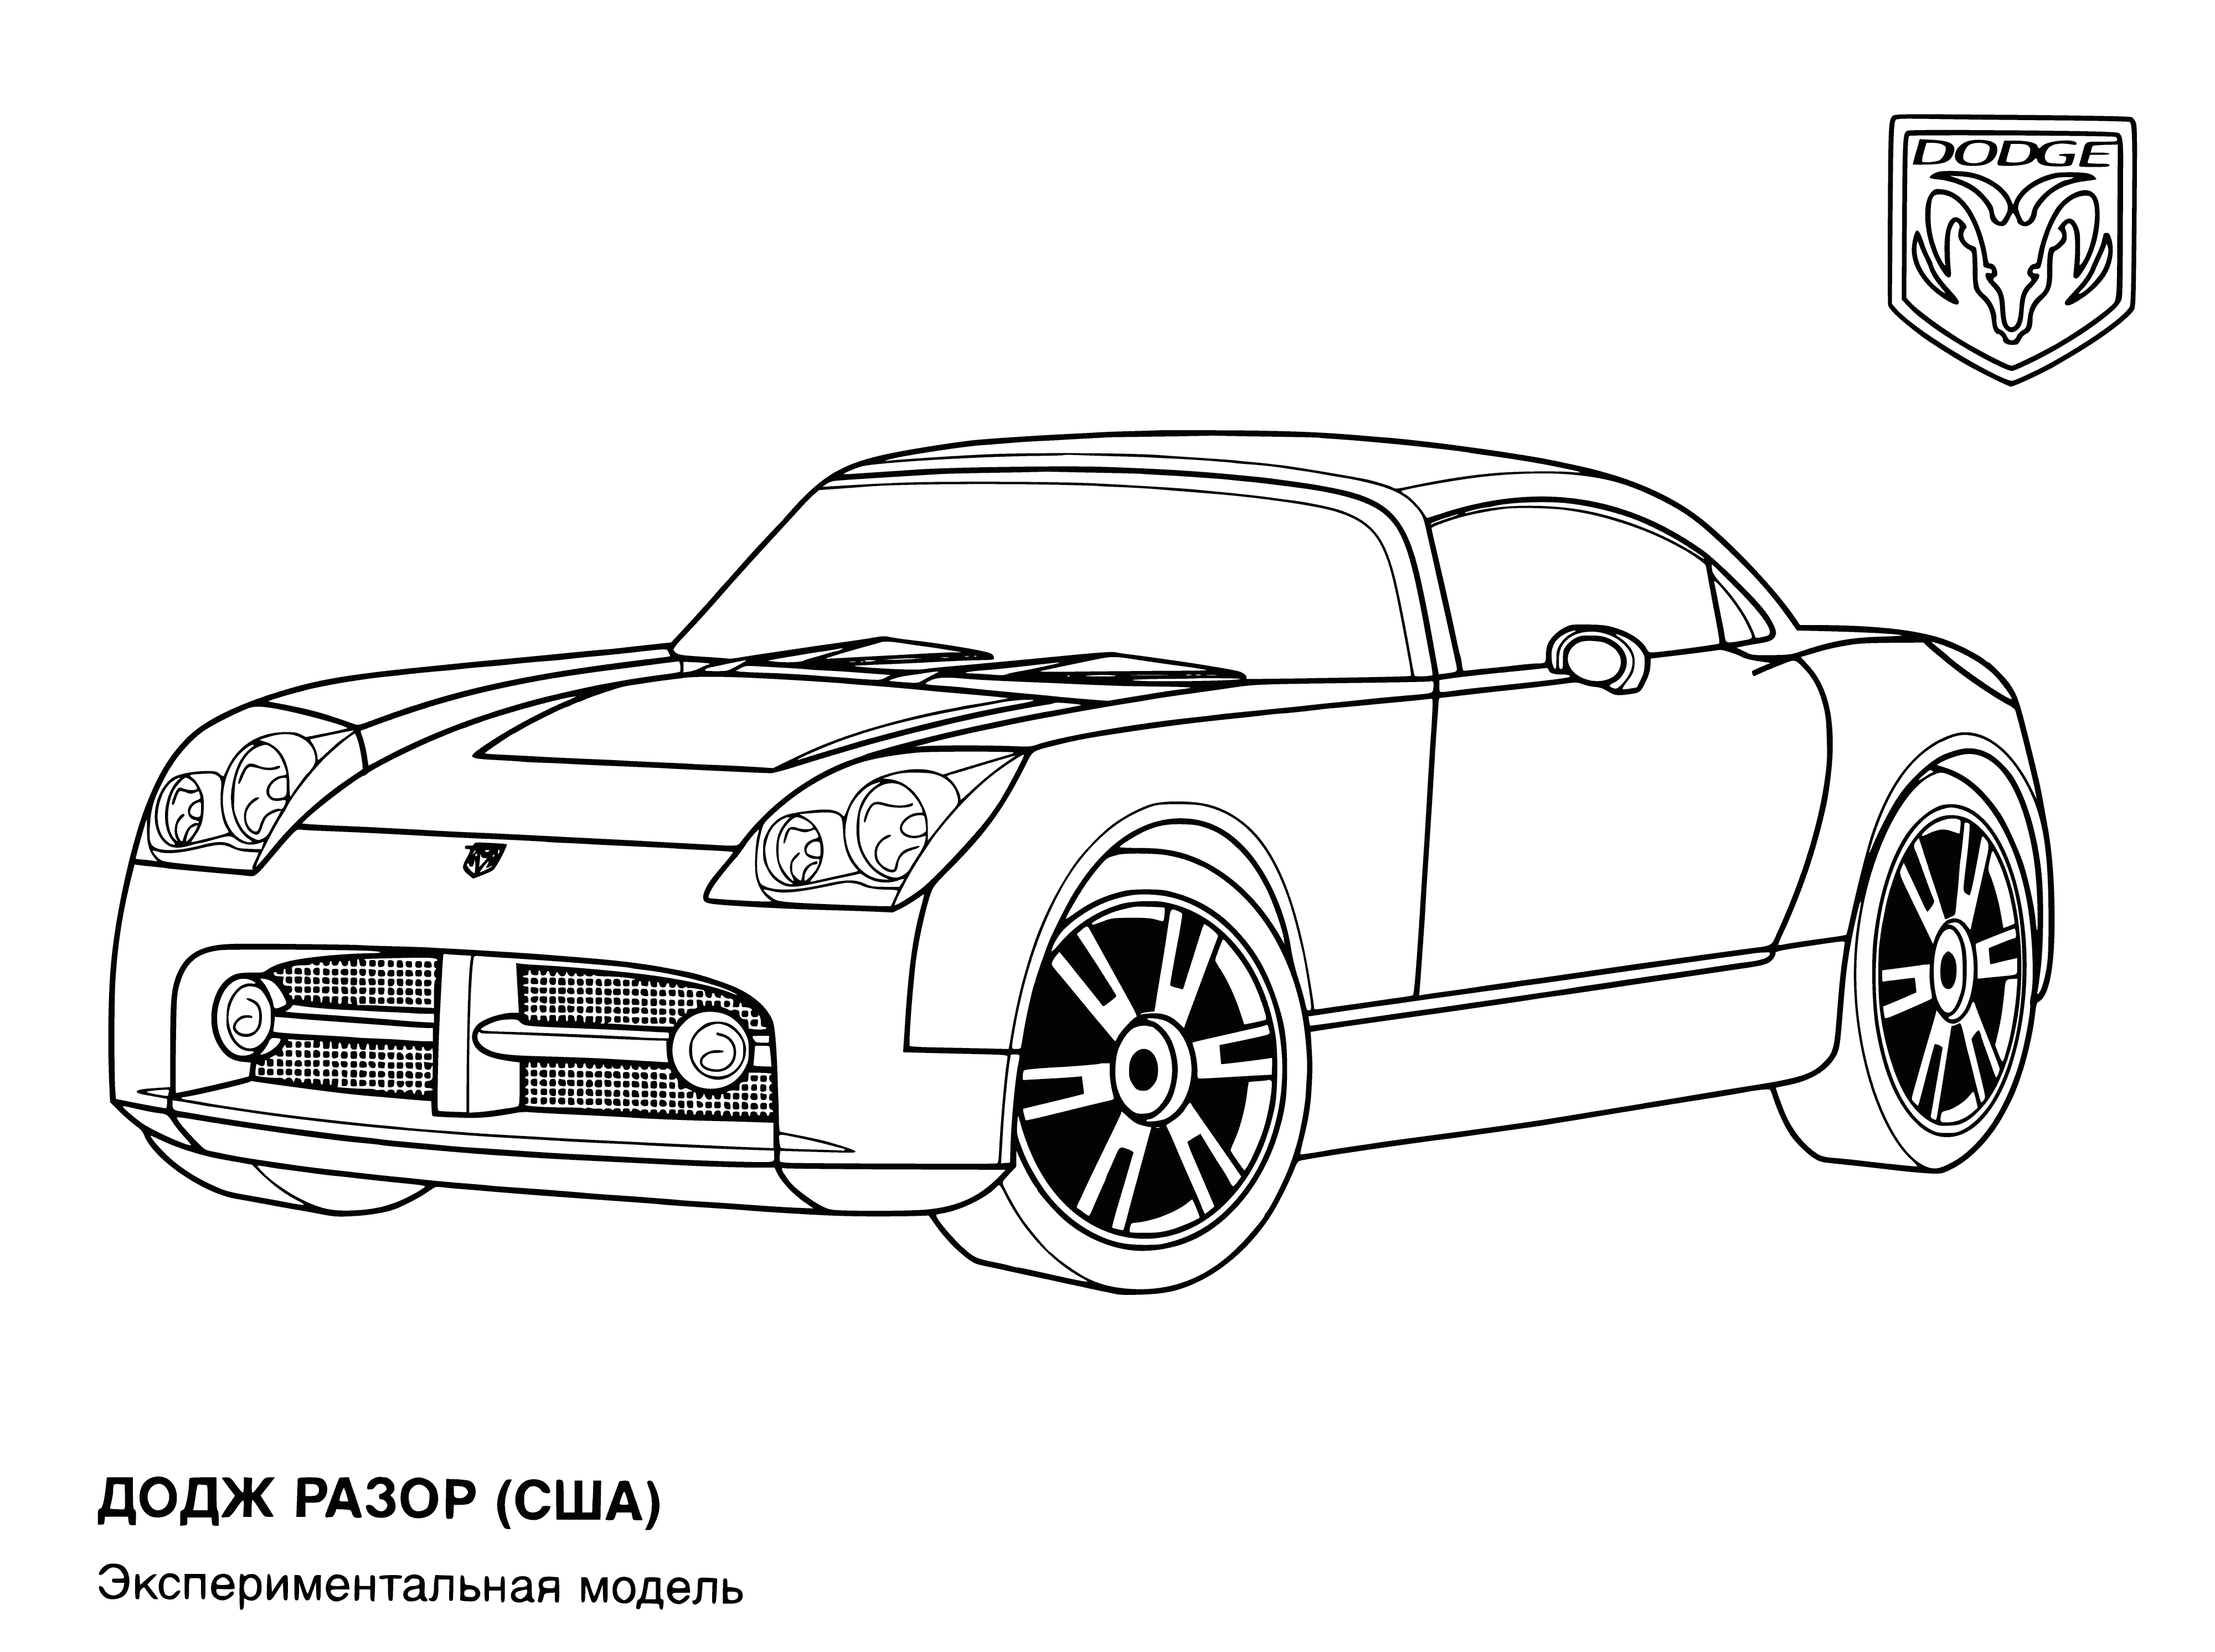 Dodge (USA) coloring page